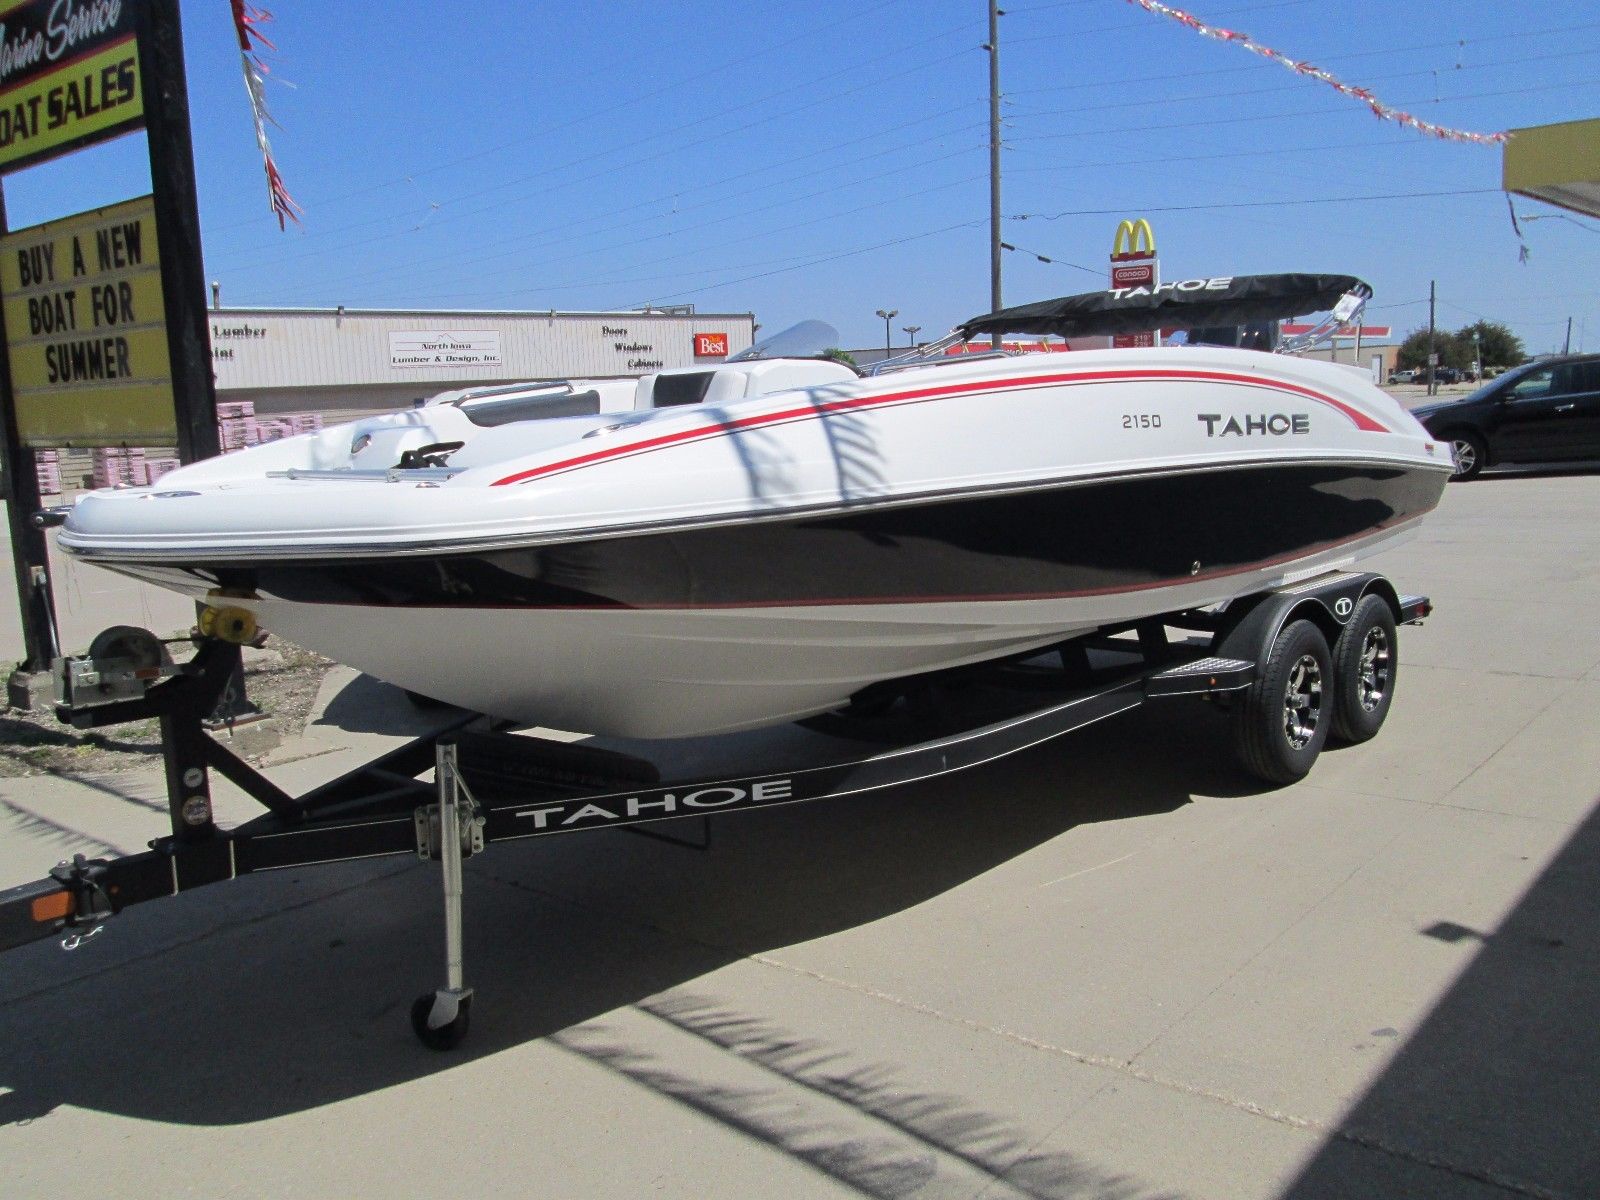 Tahoe 2150 Deck Boat 2017 for sale for $35,914 - Boats 